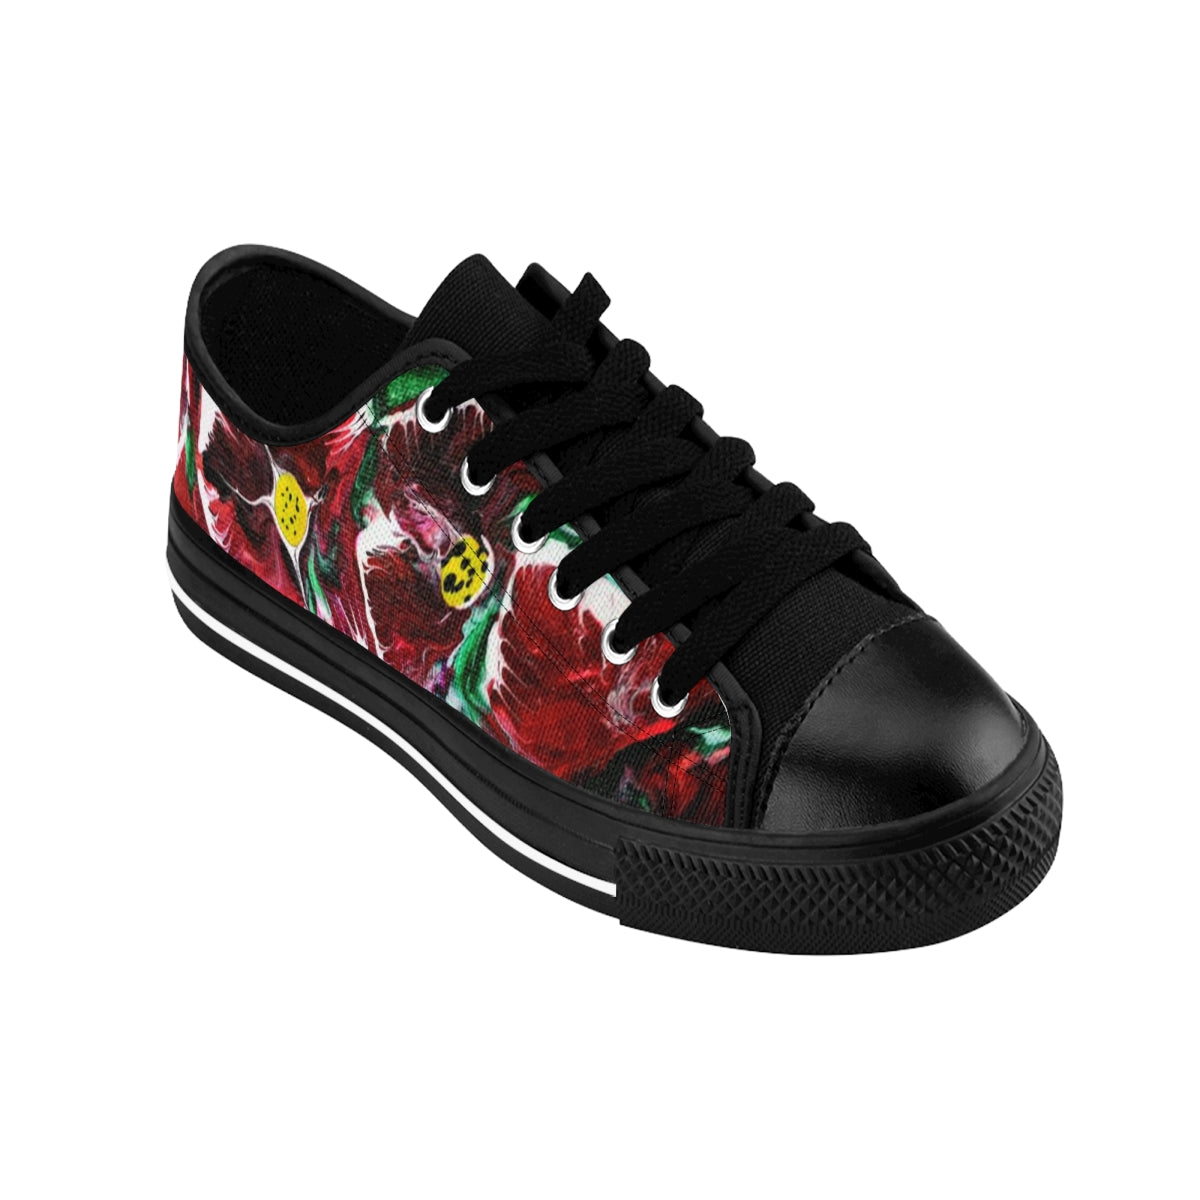 Pansy Passion Women's Sneakers